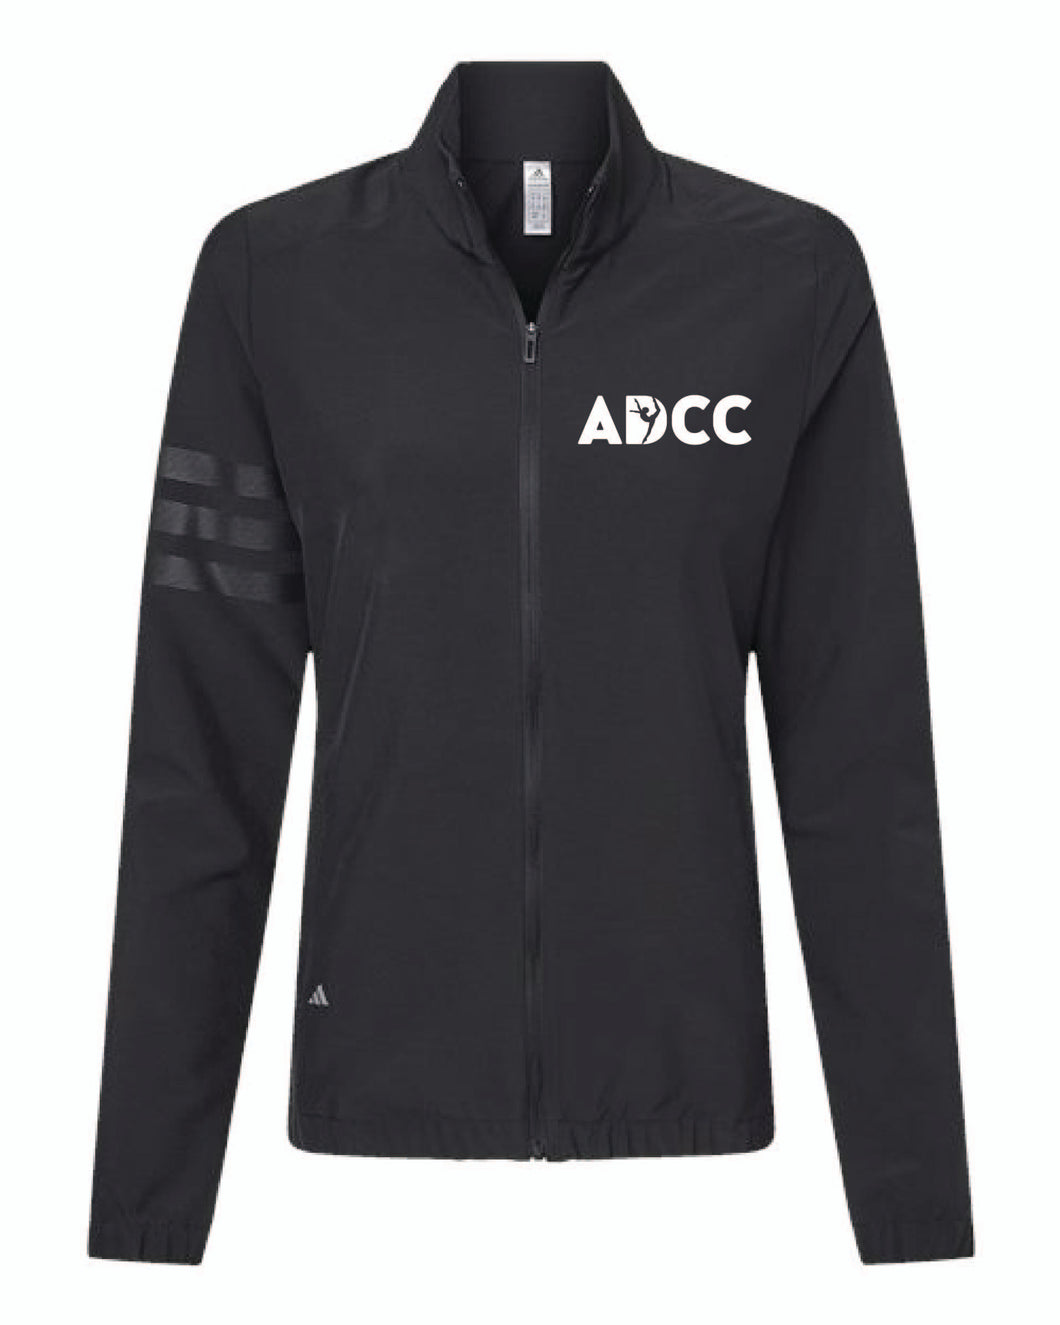 ADCC Competitive Team Jacket